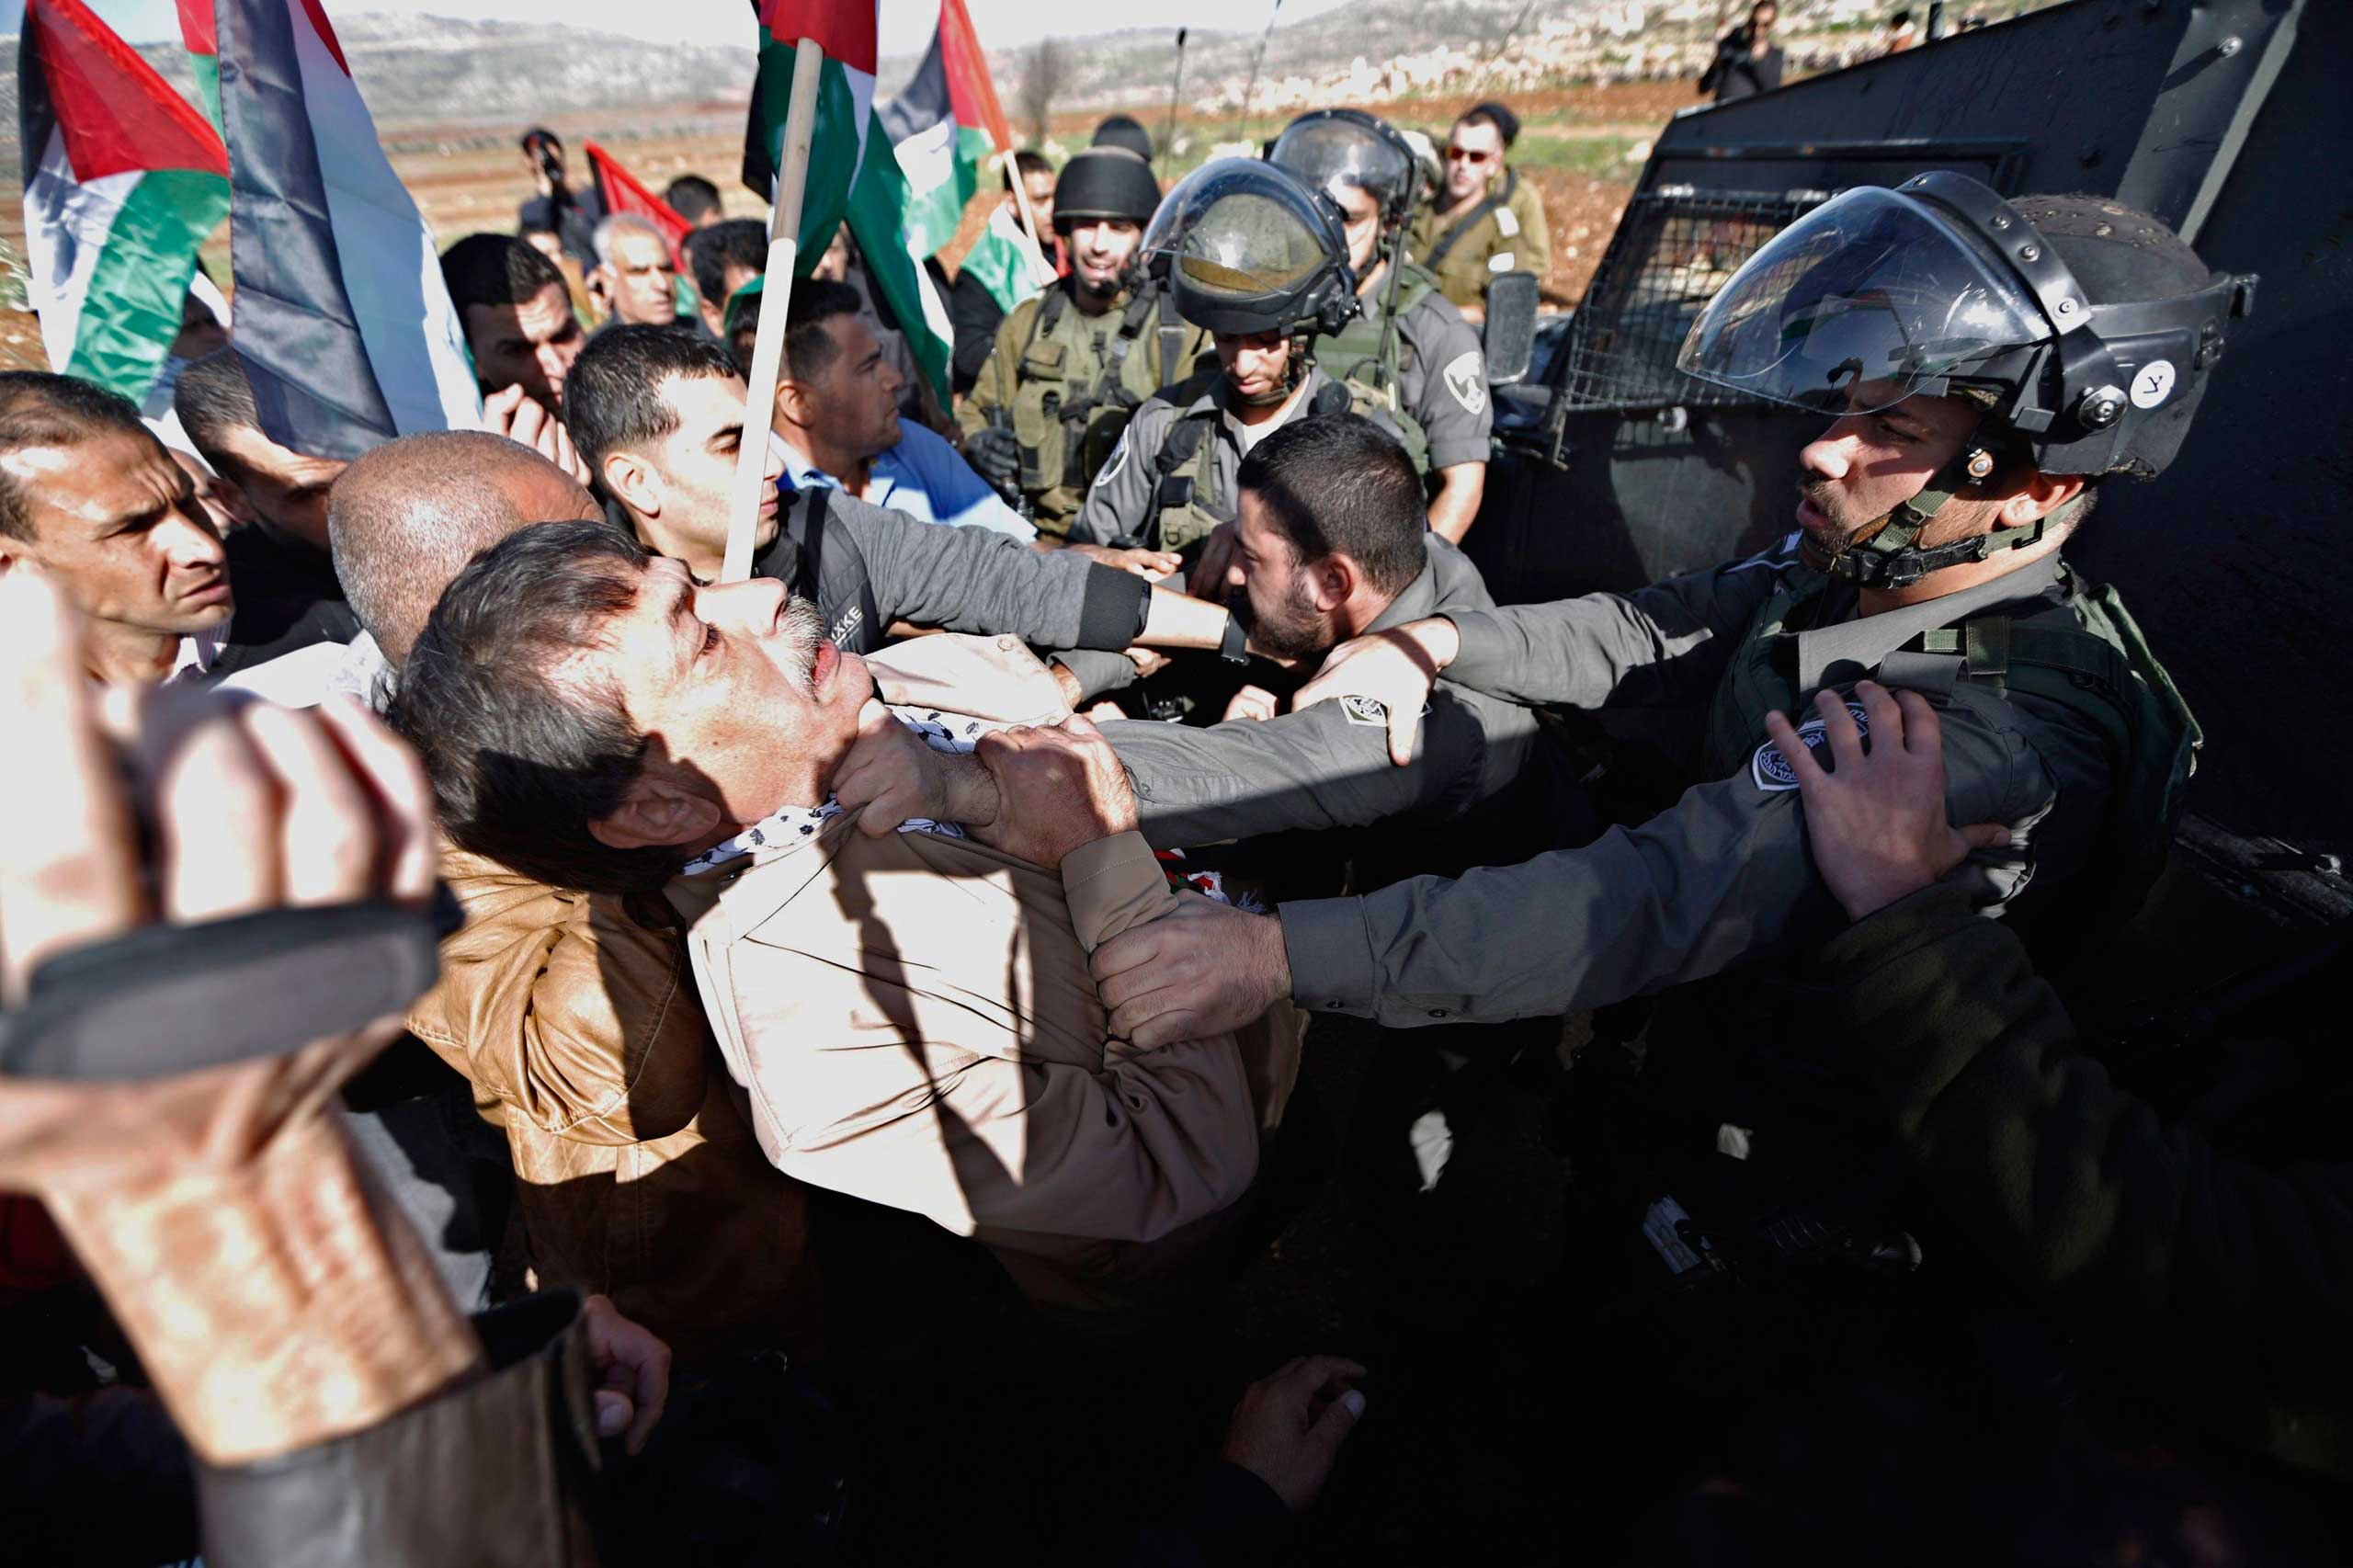 Dec. 10, 2014. Palestinian minister Ziad Abu Ein, left, scuffles with an Israeli border policeman in the village of  Turmus Aya near the West Bank city of Ramallah. Abu Ein died shortly after being hit by Israeli soldiers during a protest in West Bank.